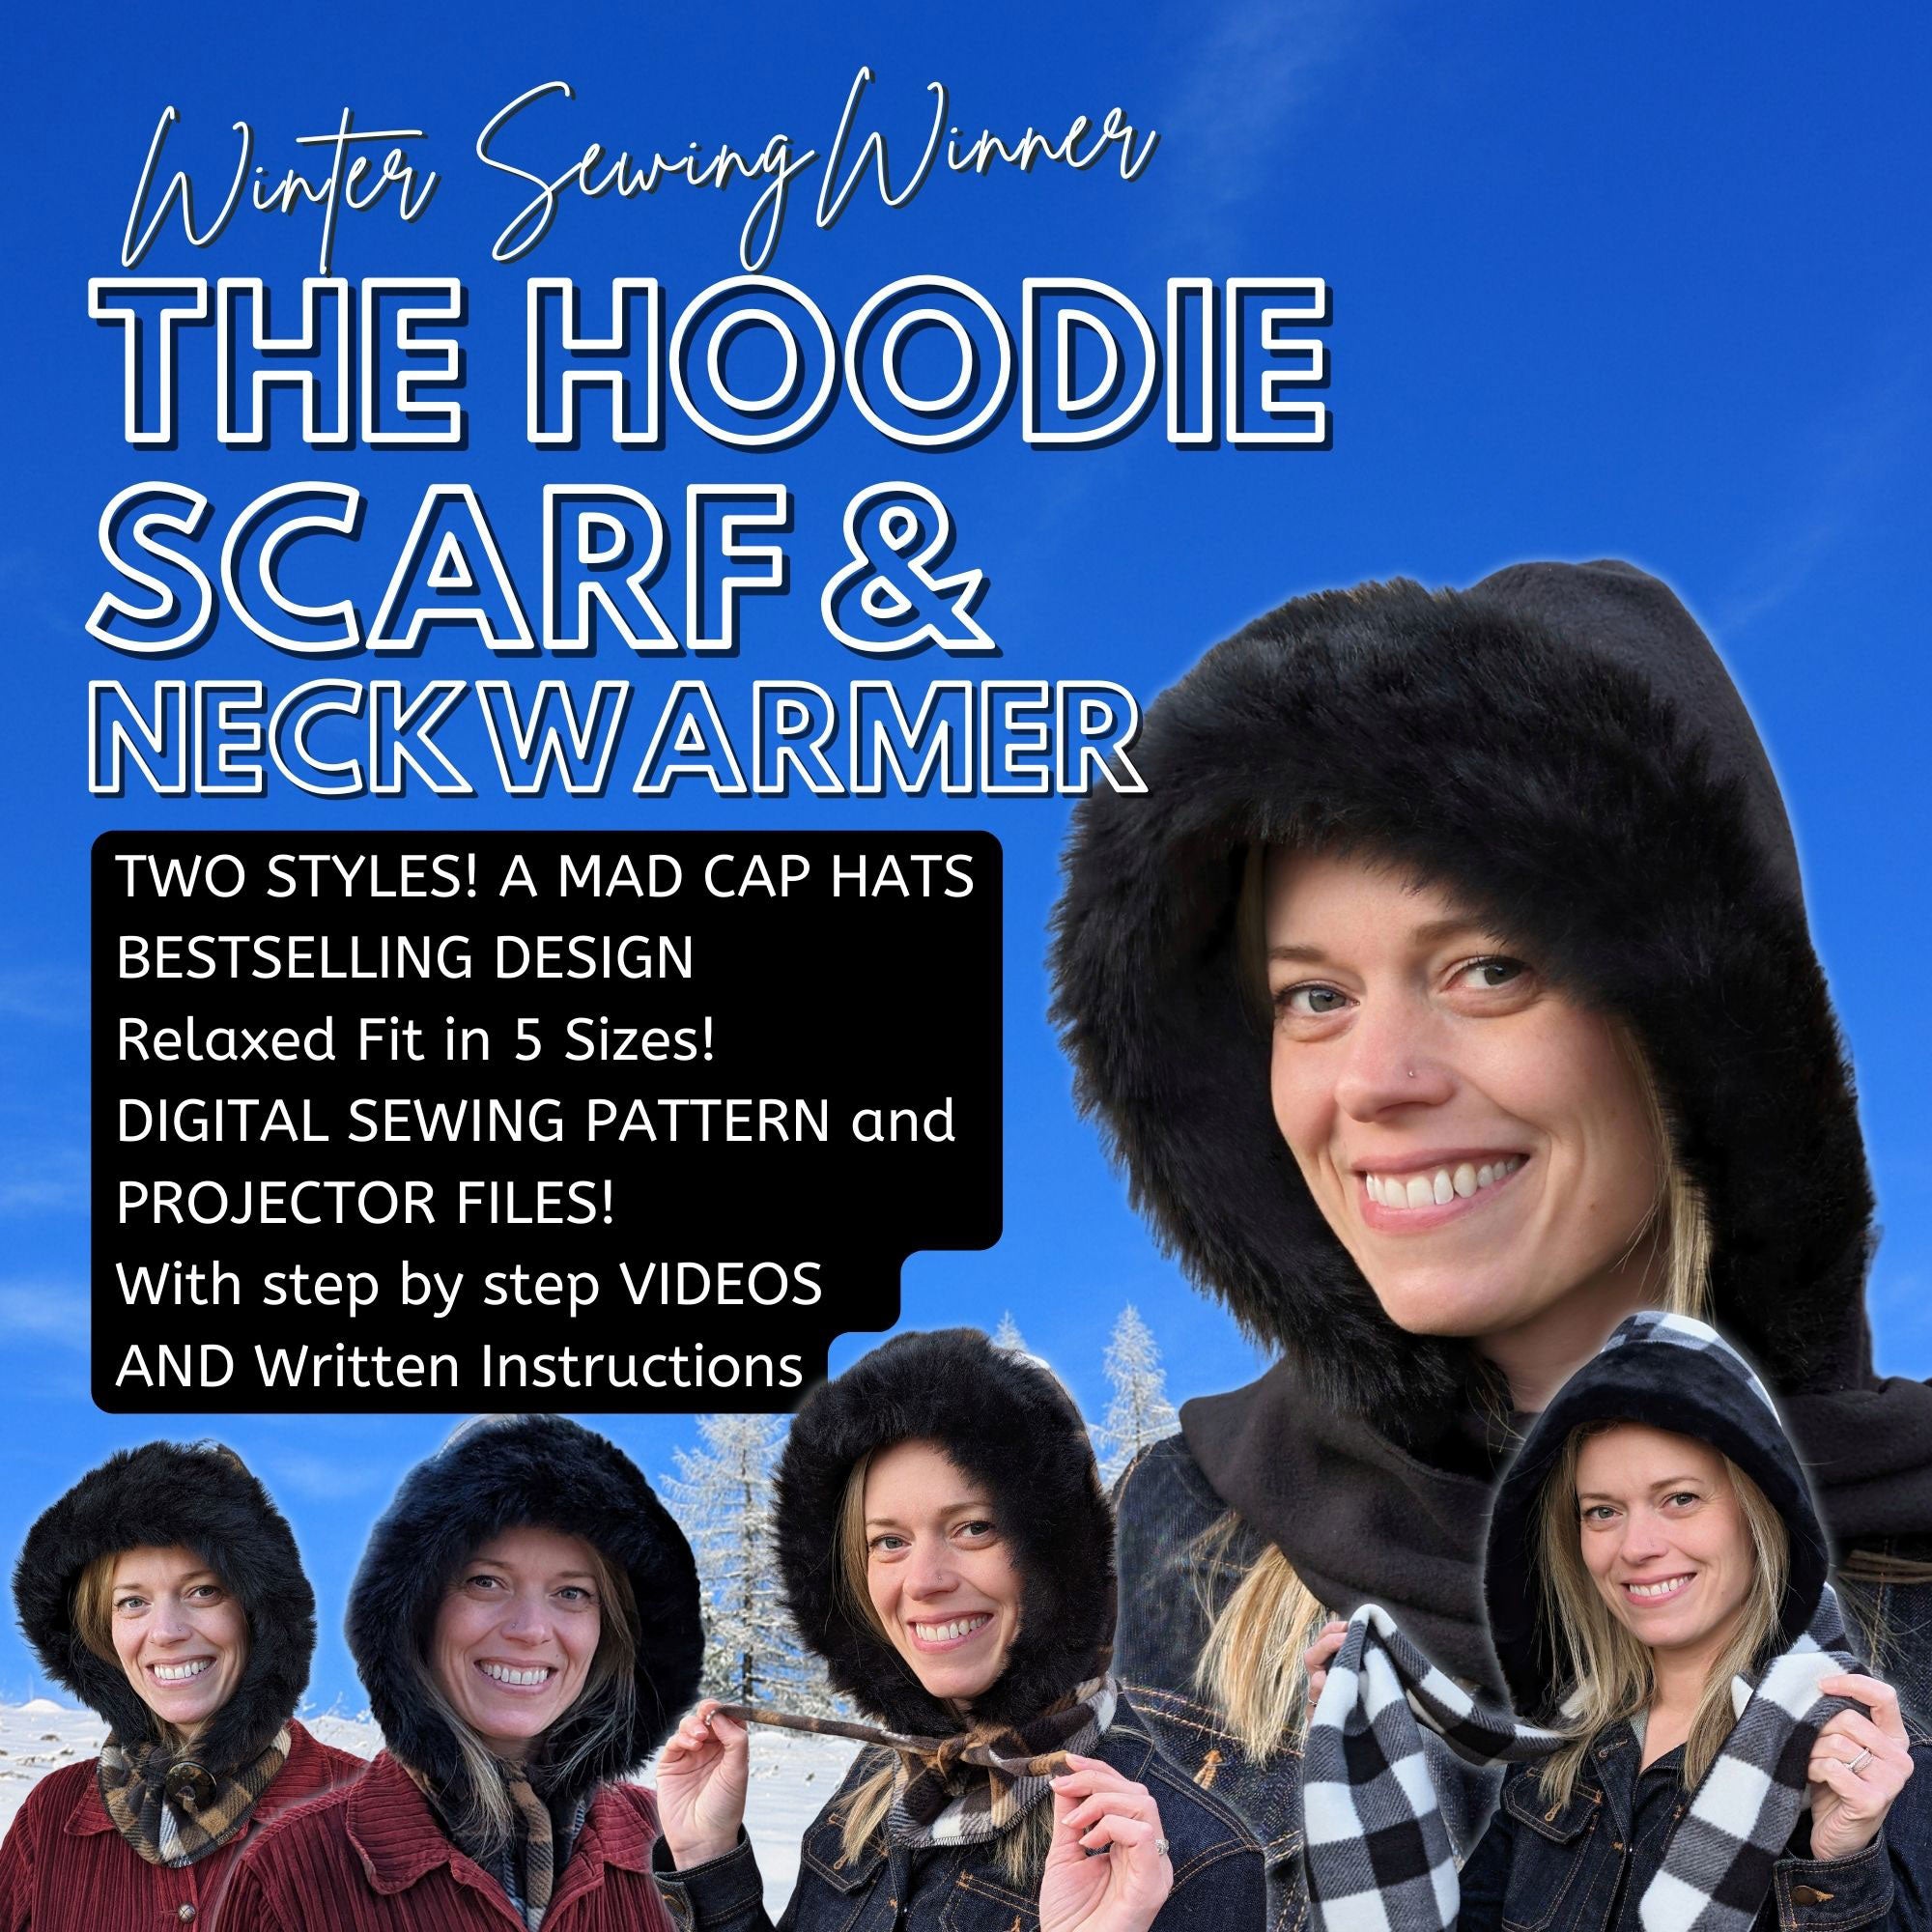 Hoodie Scarf and Neckwarmer, sewing pattern and instructions, digital files for printer and projector